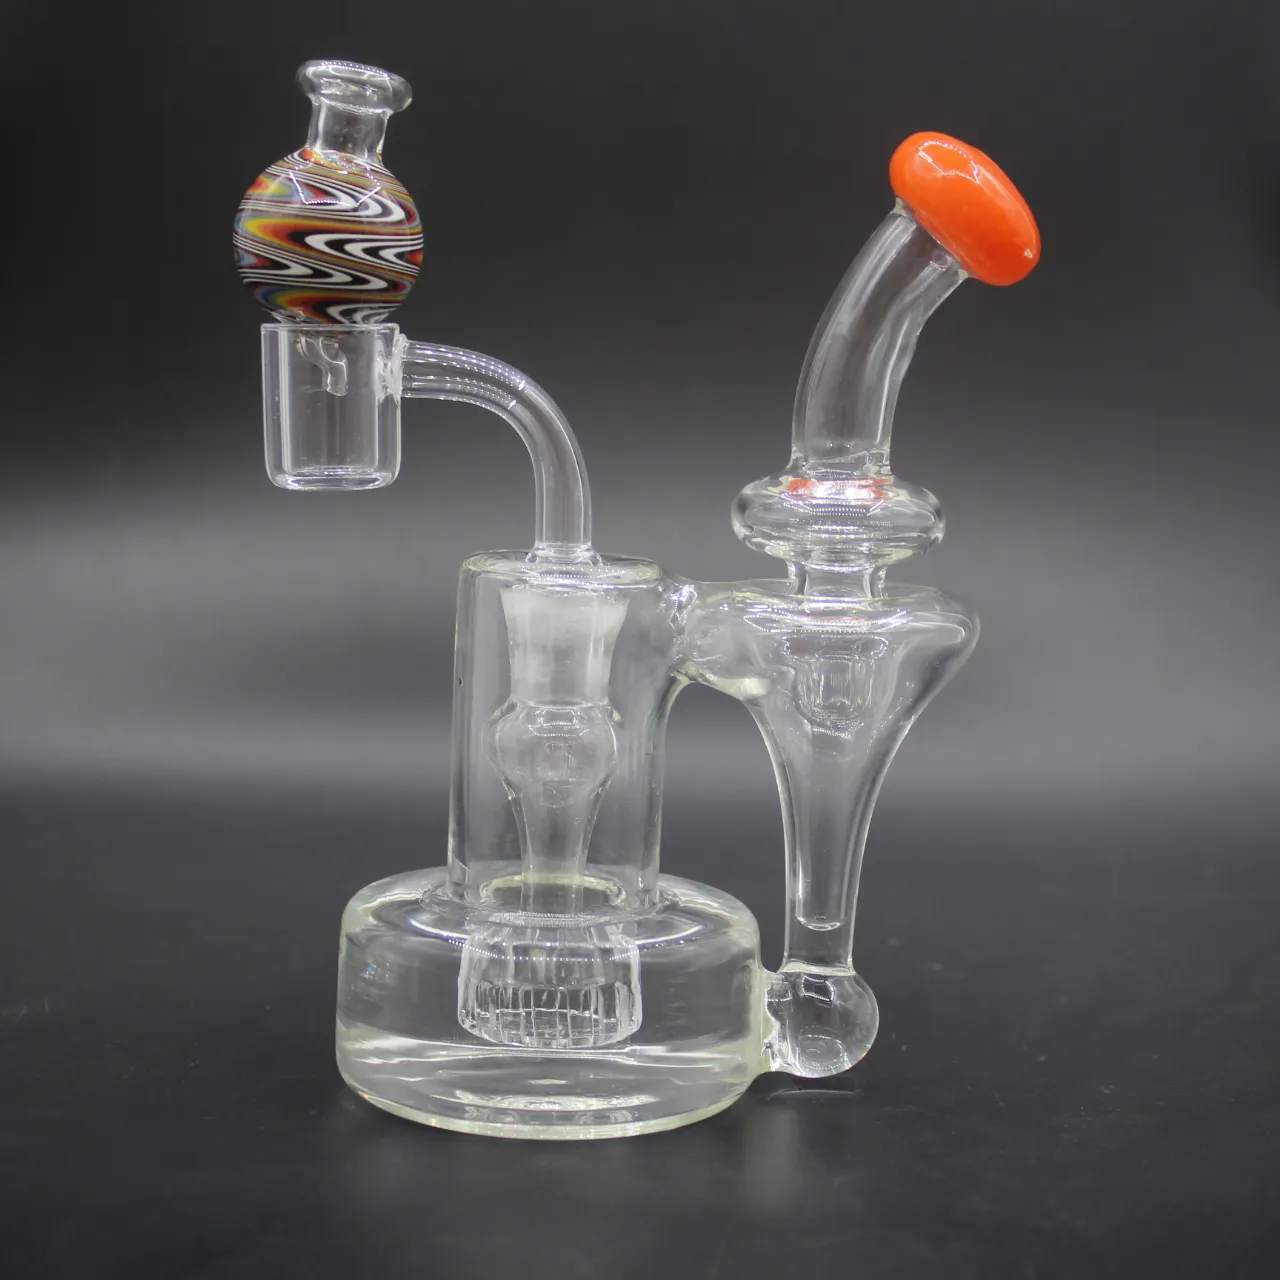 Smoke glass recycler rig pipe 14 MM male joint combination colors come with a quartz banger and cap